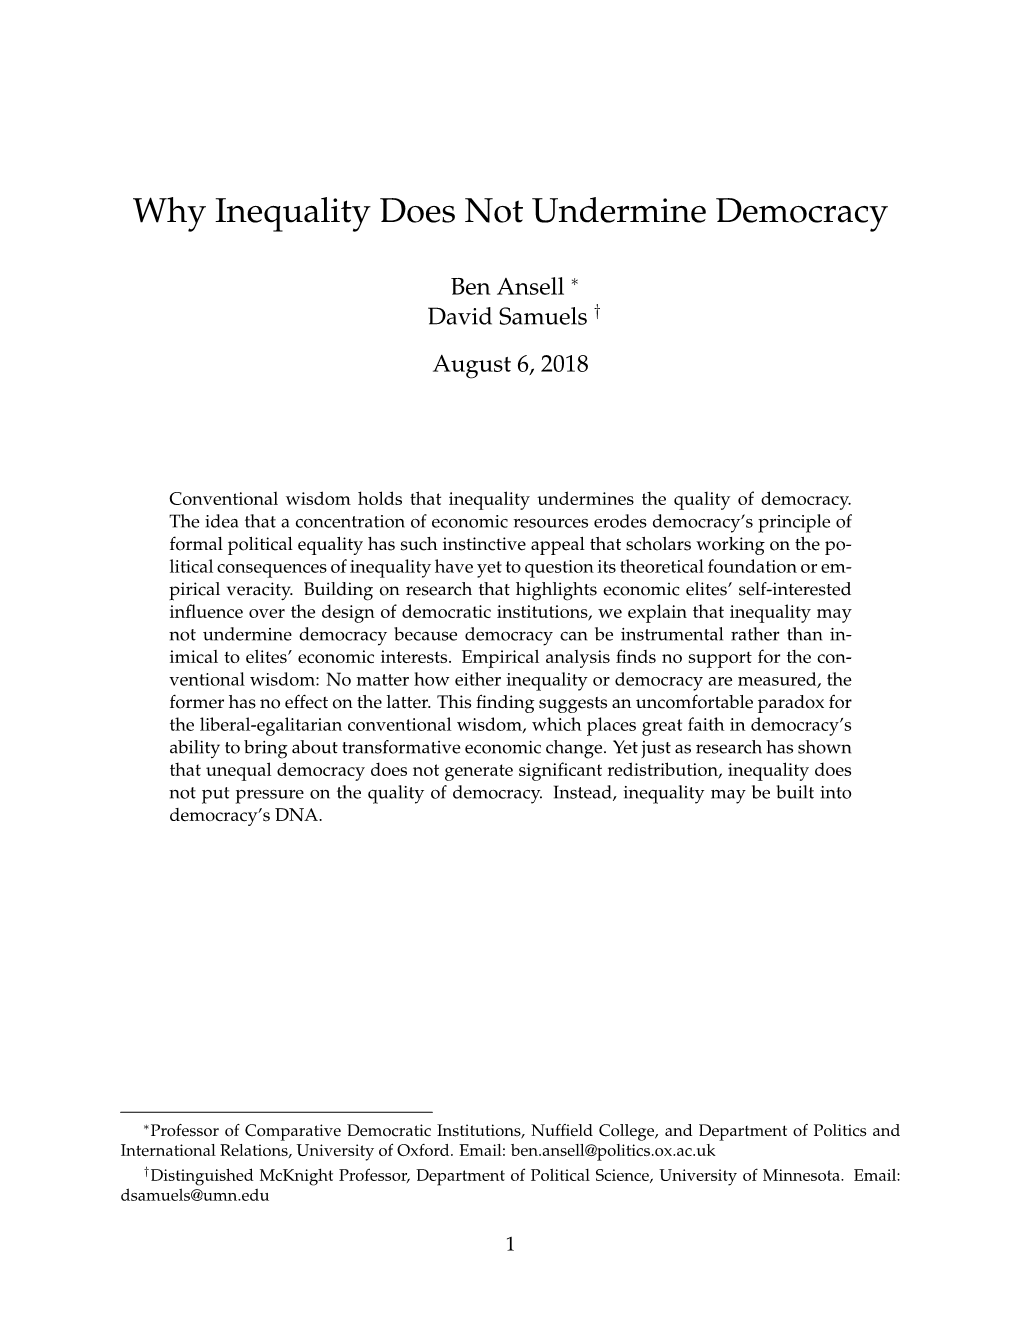 Why Inequality Does Not Undermine Democracy